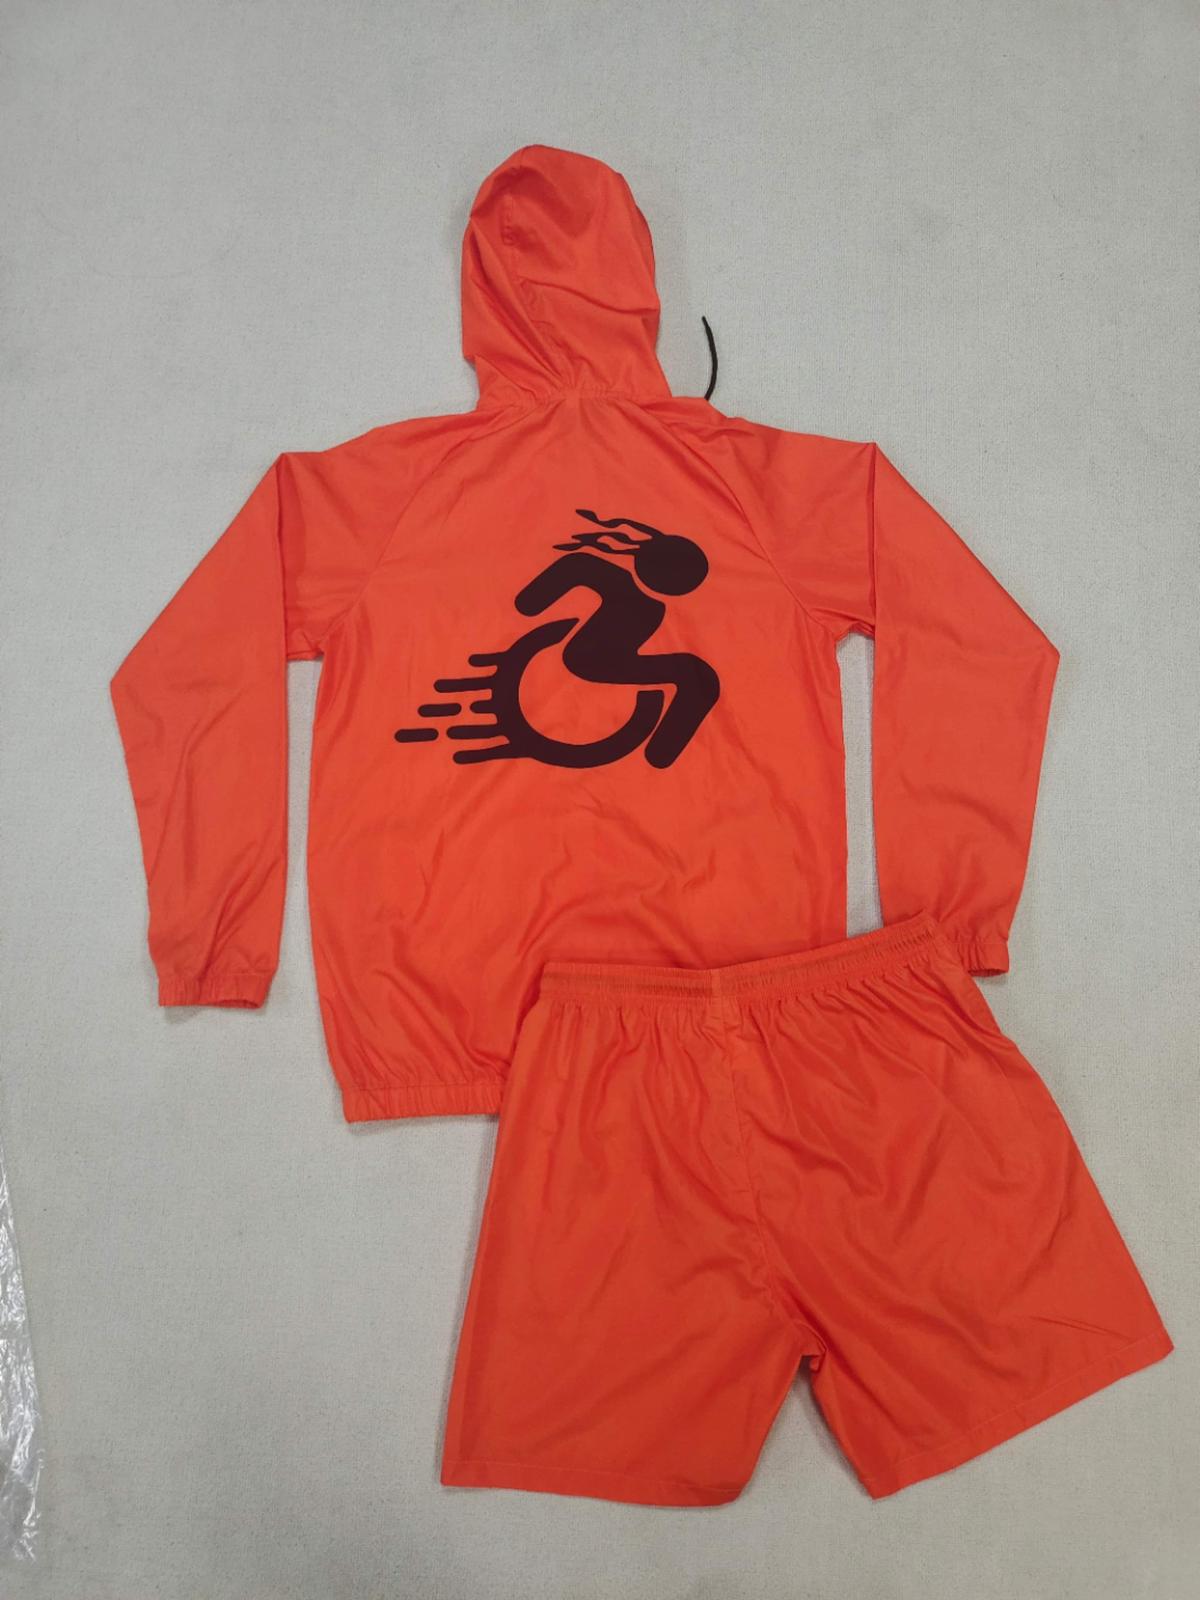 Fabric weight: 75D
Fabric composition: 100% polyester, waterproof
Comes in kids and adult sizes.

Shorts have a zipper in the inseam or in between the legs
Supports 